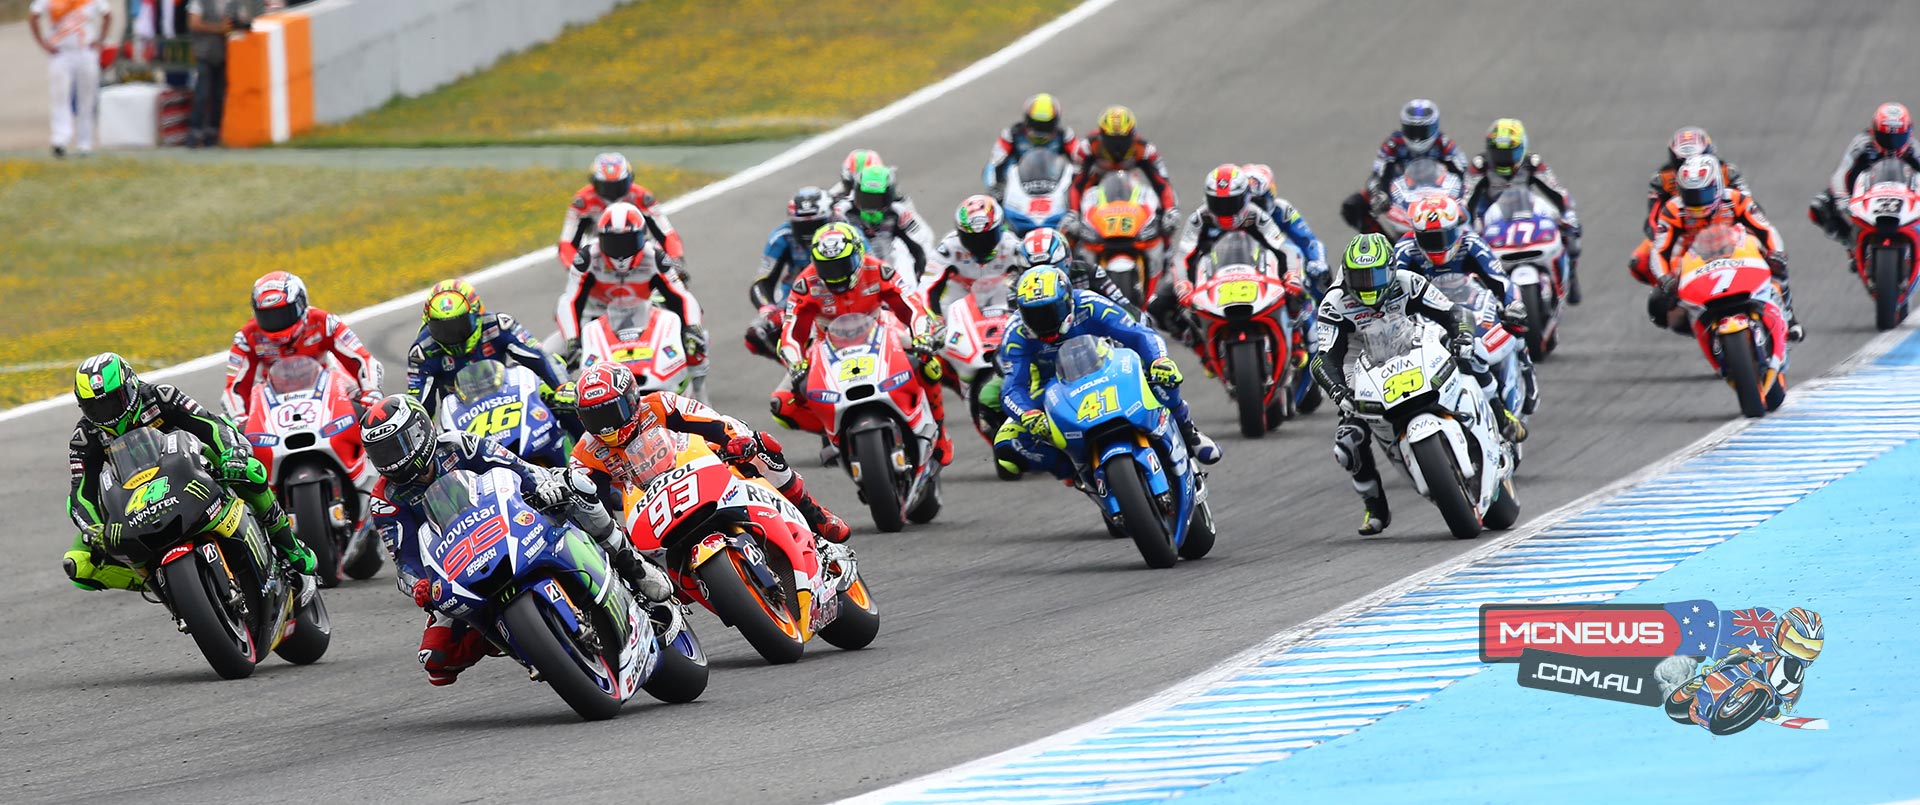 Motogp 15 Jerez Gallery A Motorcycle News Sport And Reviews